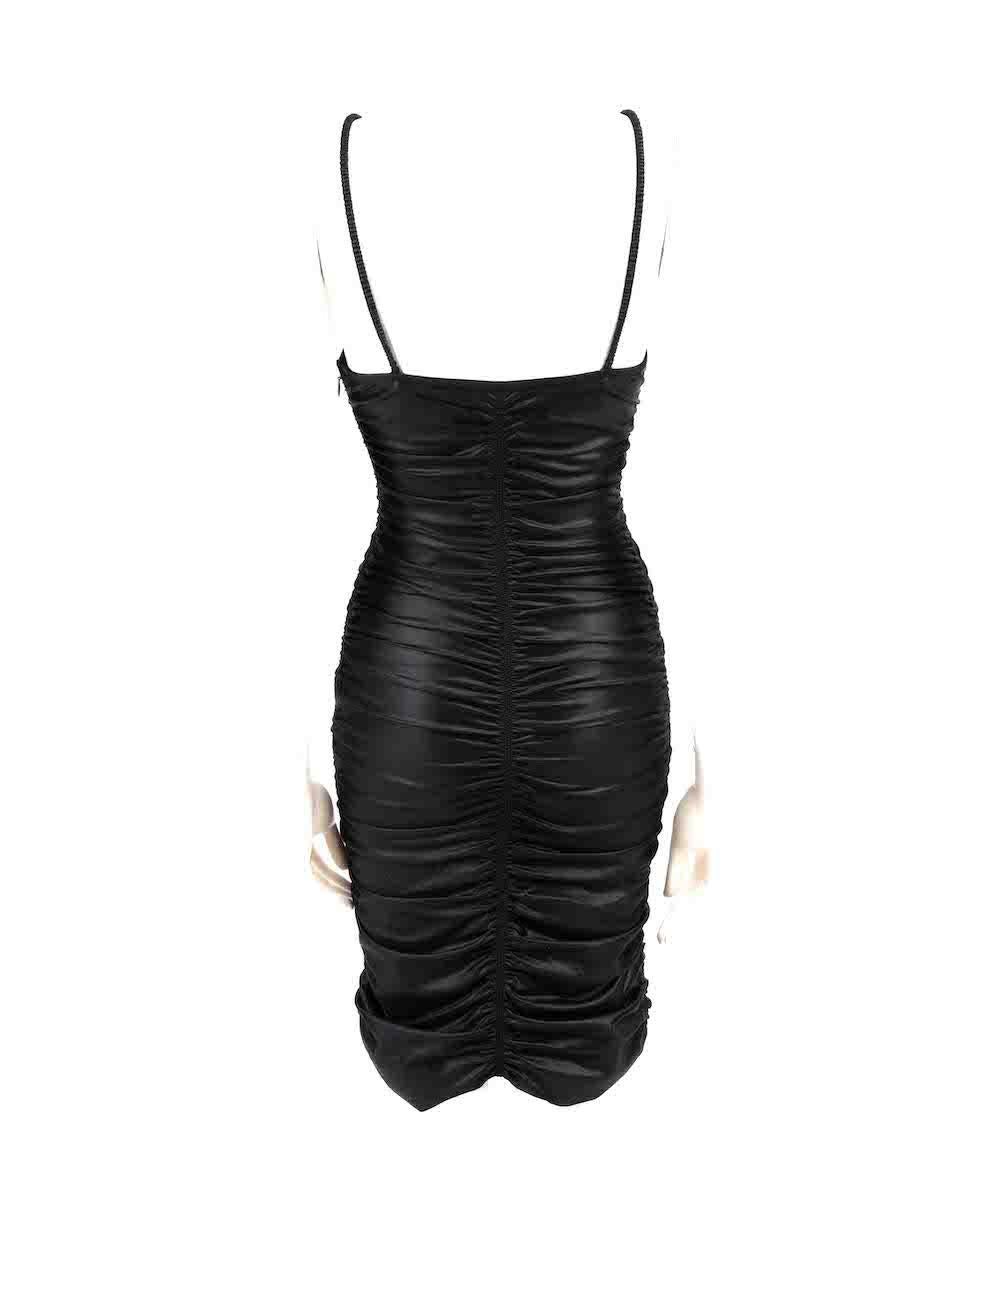 Alexander Wang Black Ruched Jersey Mini Dress Size S In Good Condition For Sale In London, GB